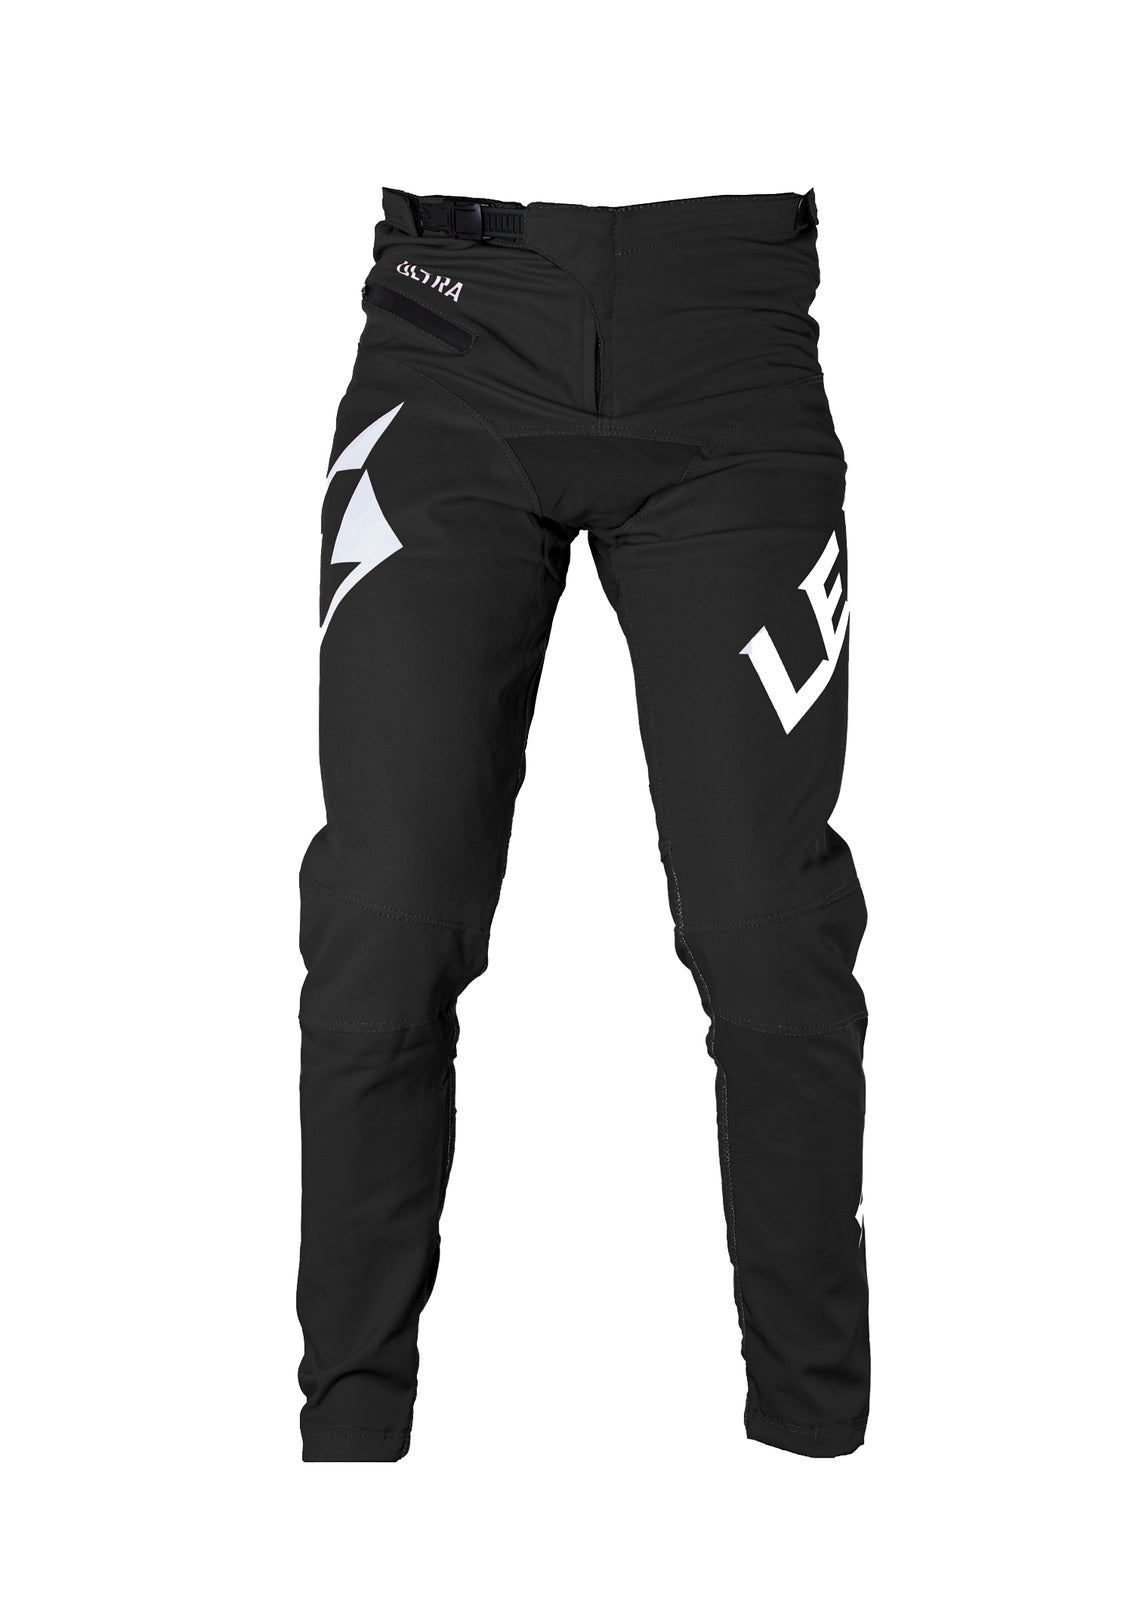 A pair of Lead Ultra Pants adorned with a white logo, designed for reducing drag in fitted race wear.